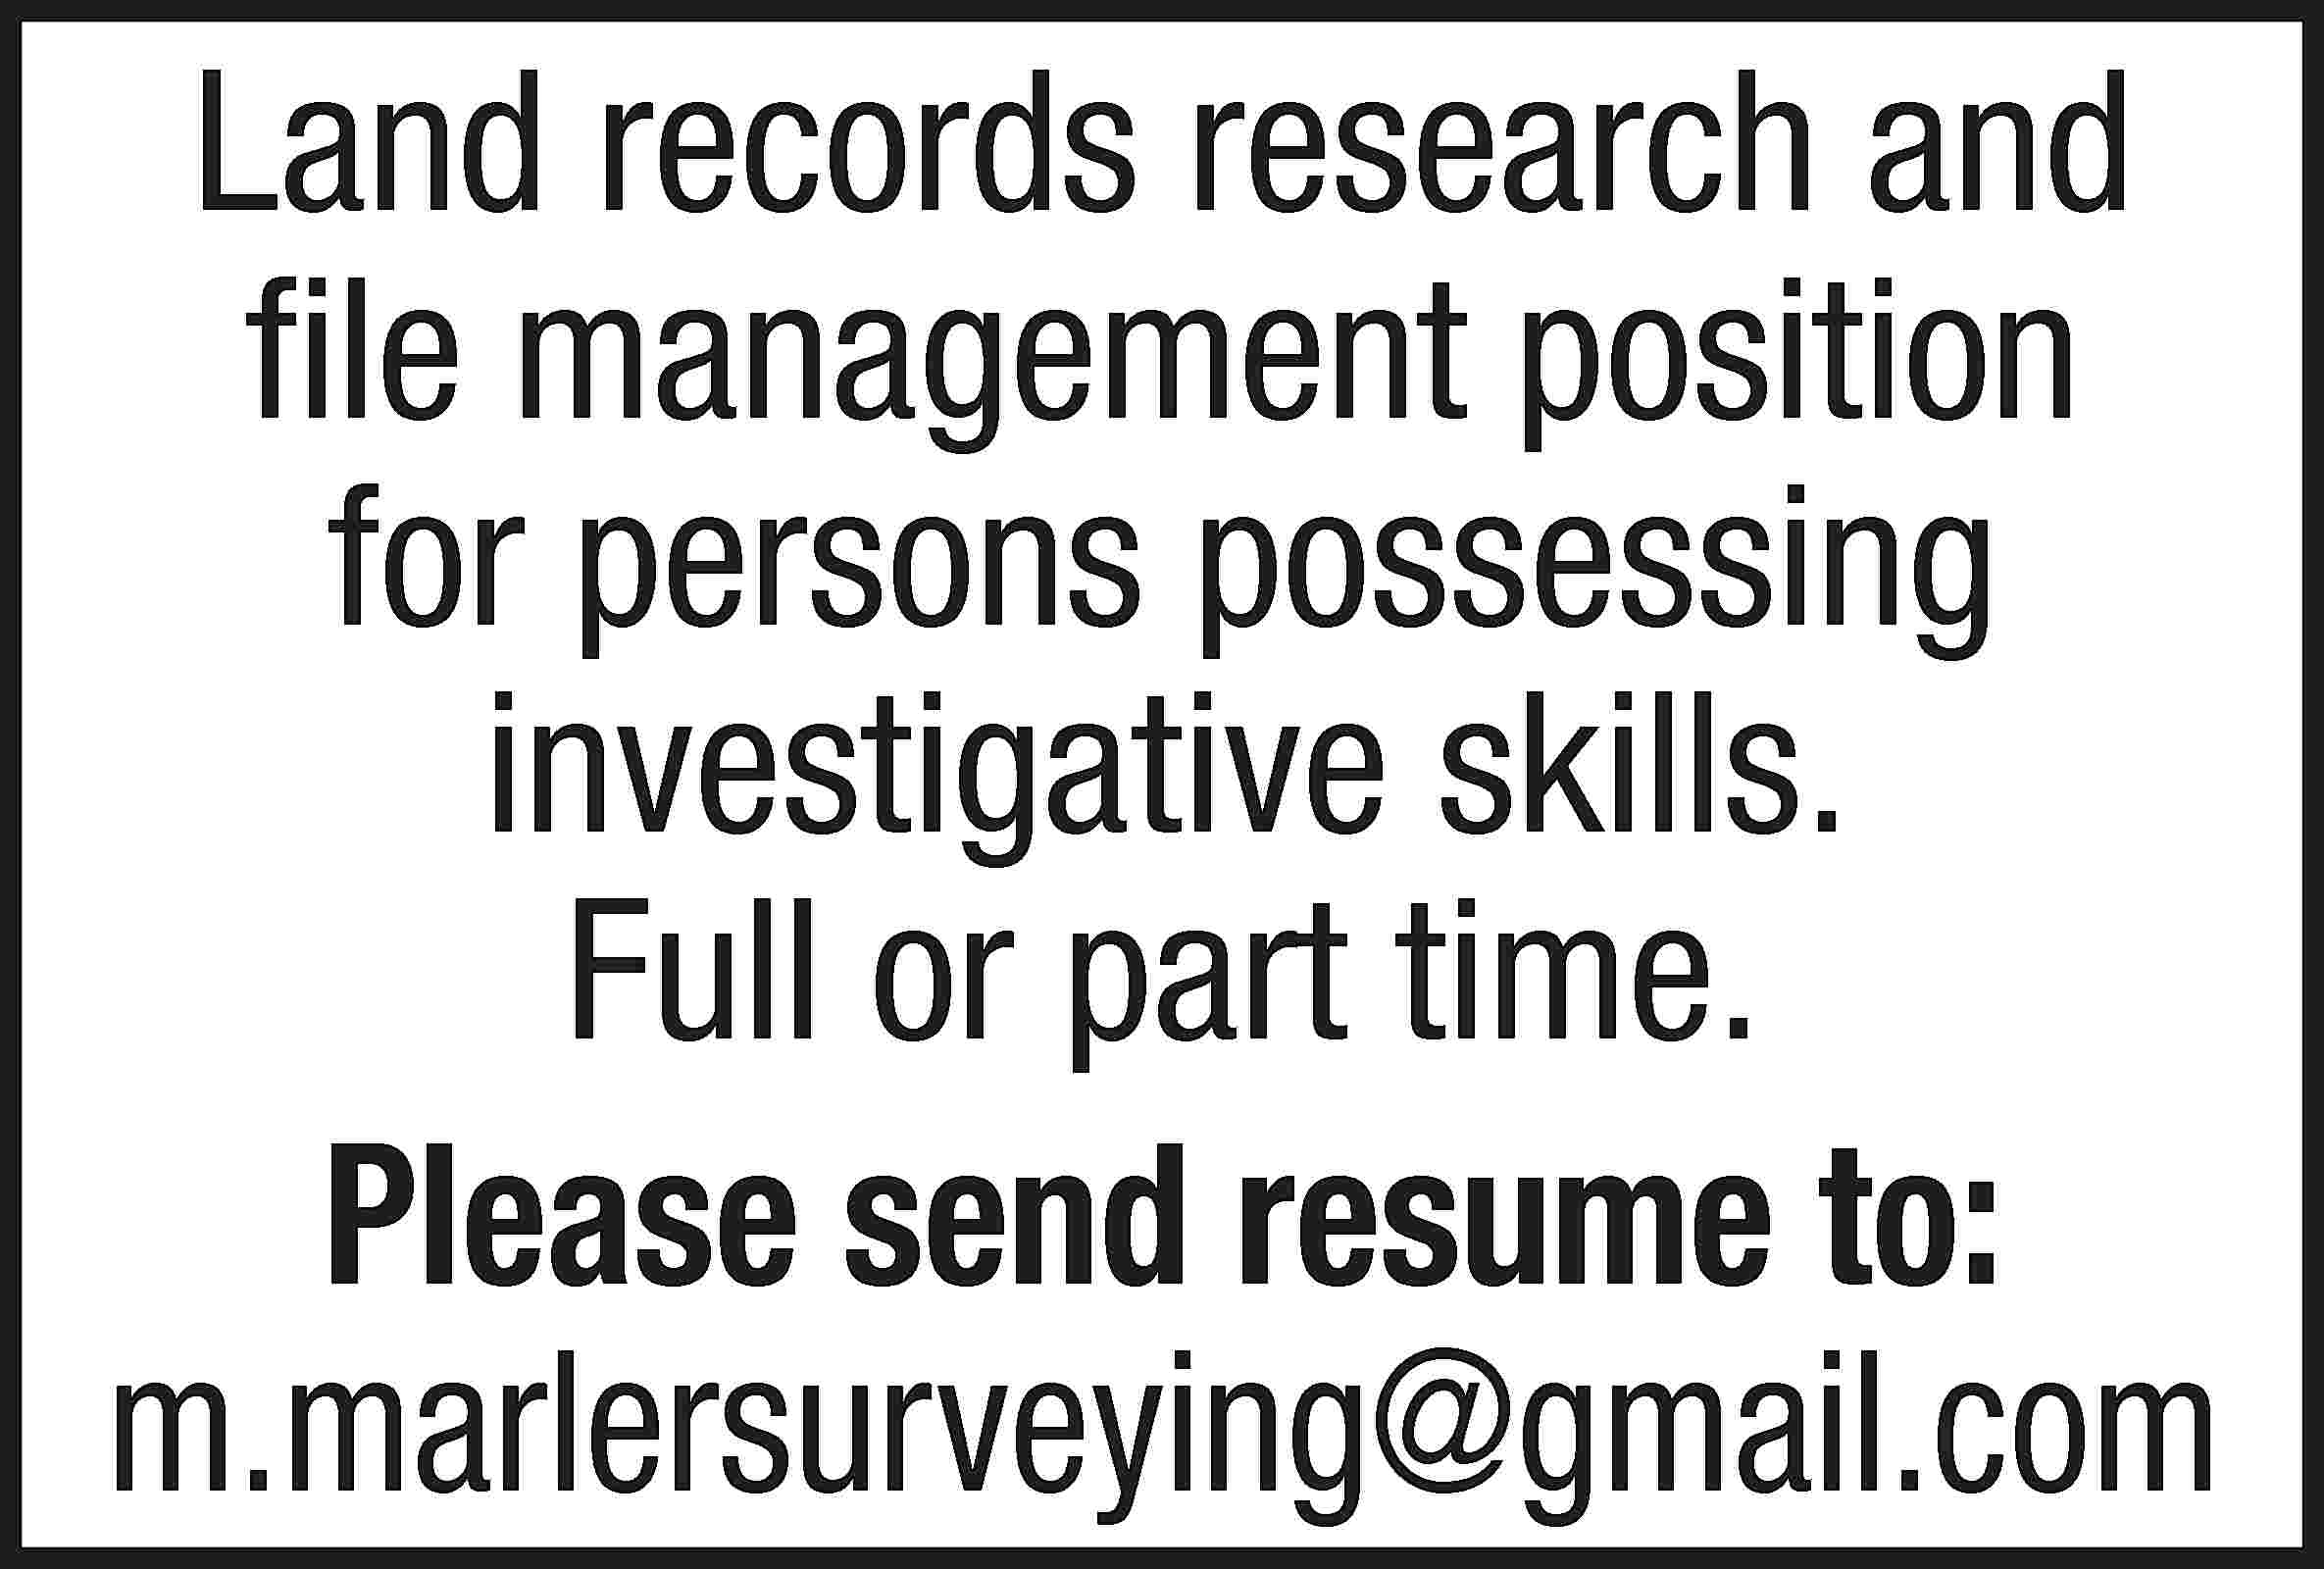 Land records research and file  Land records research and file management position for persons possessing investigative skills. Full or part time. Please send resume to: m.marlersurveying@gmail.com